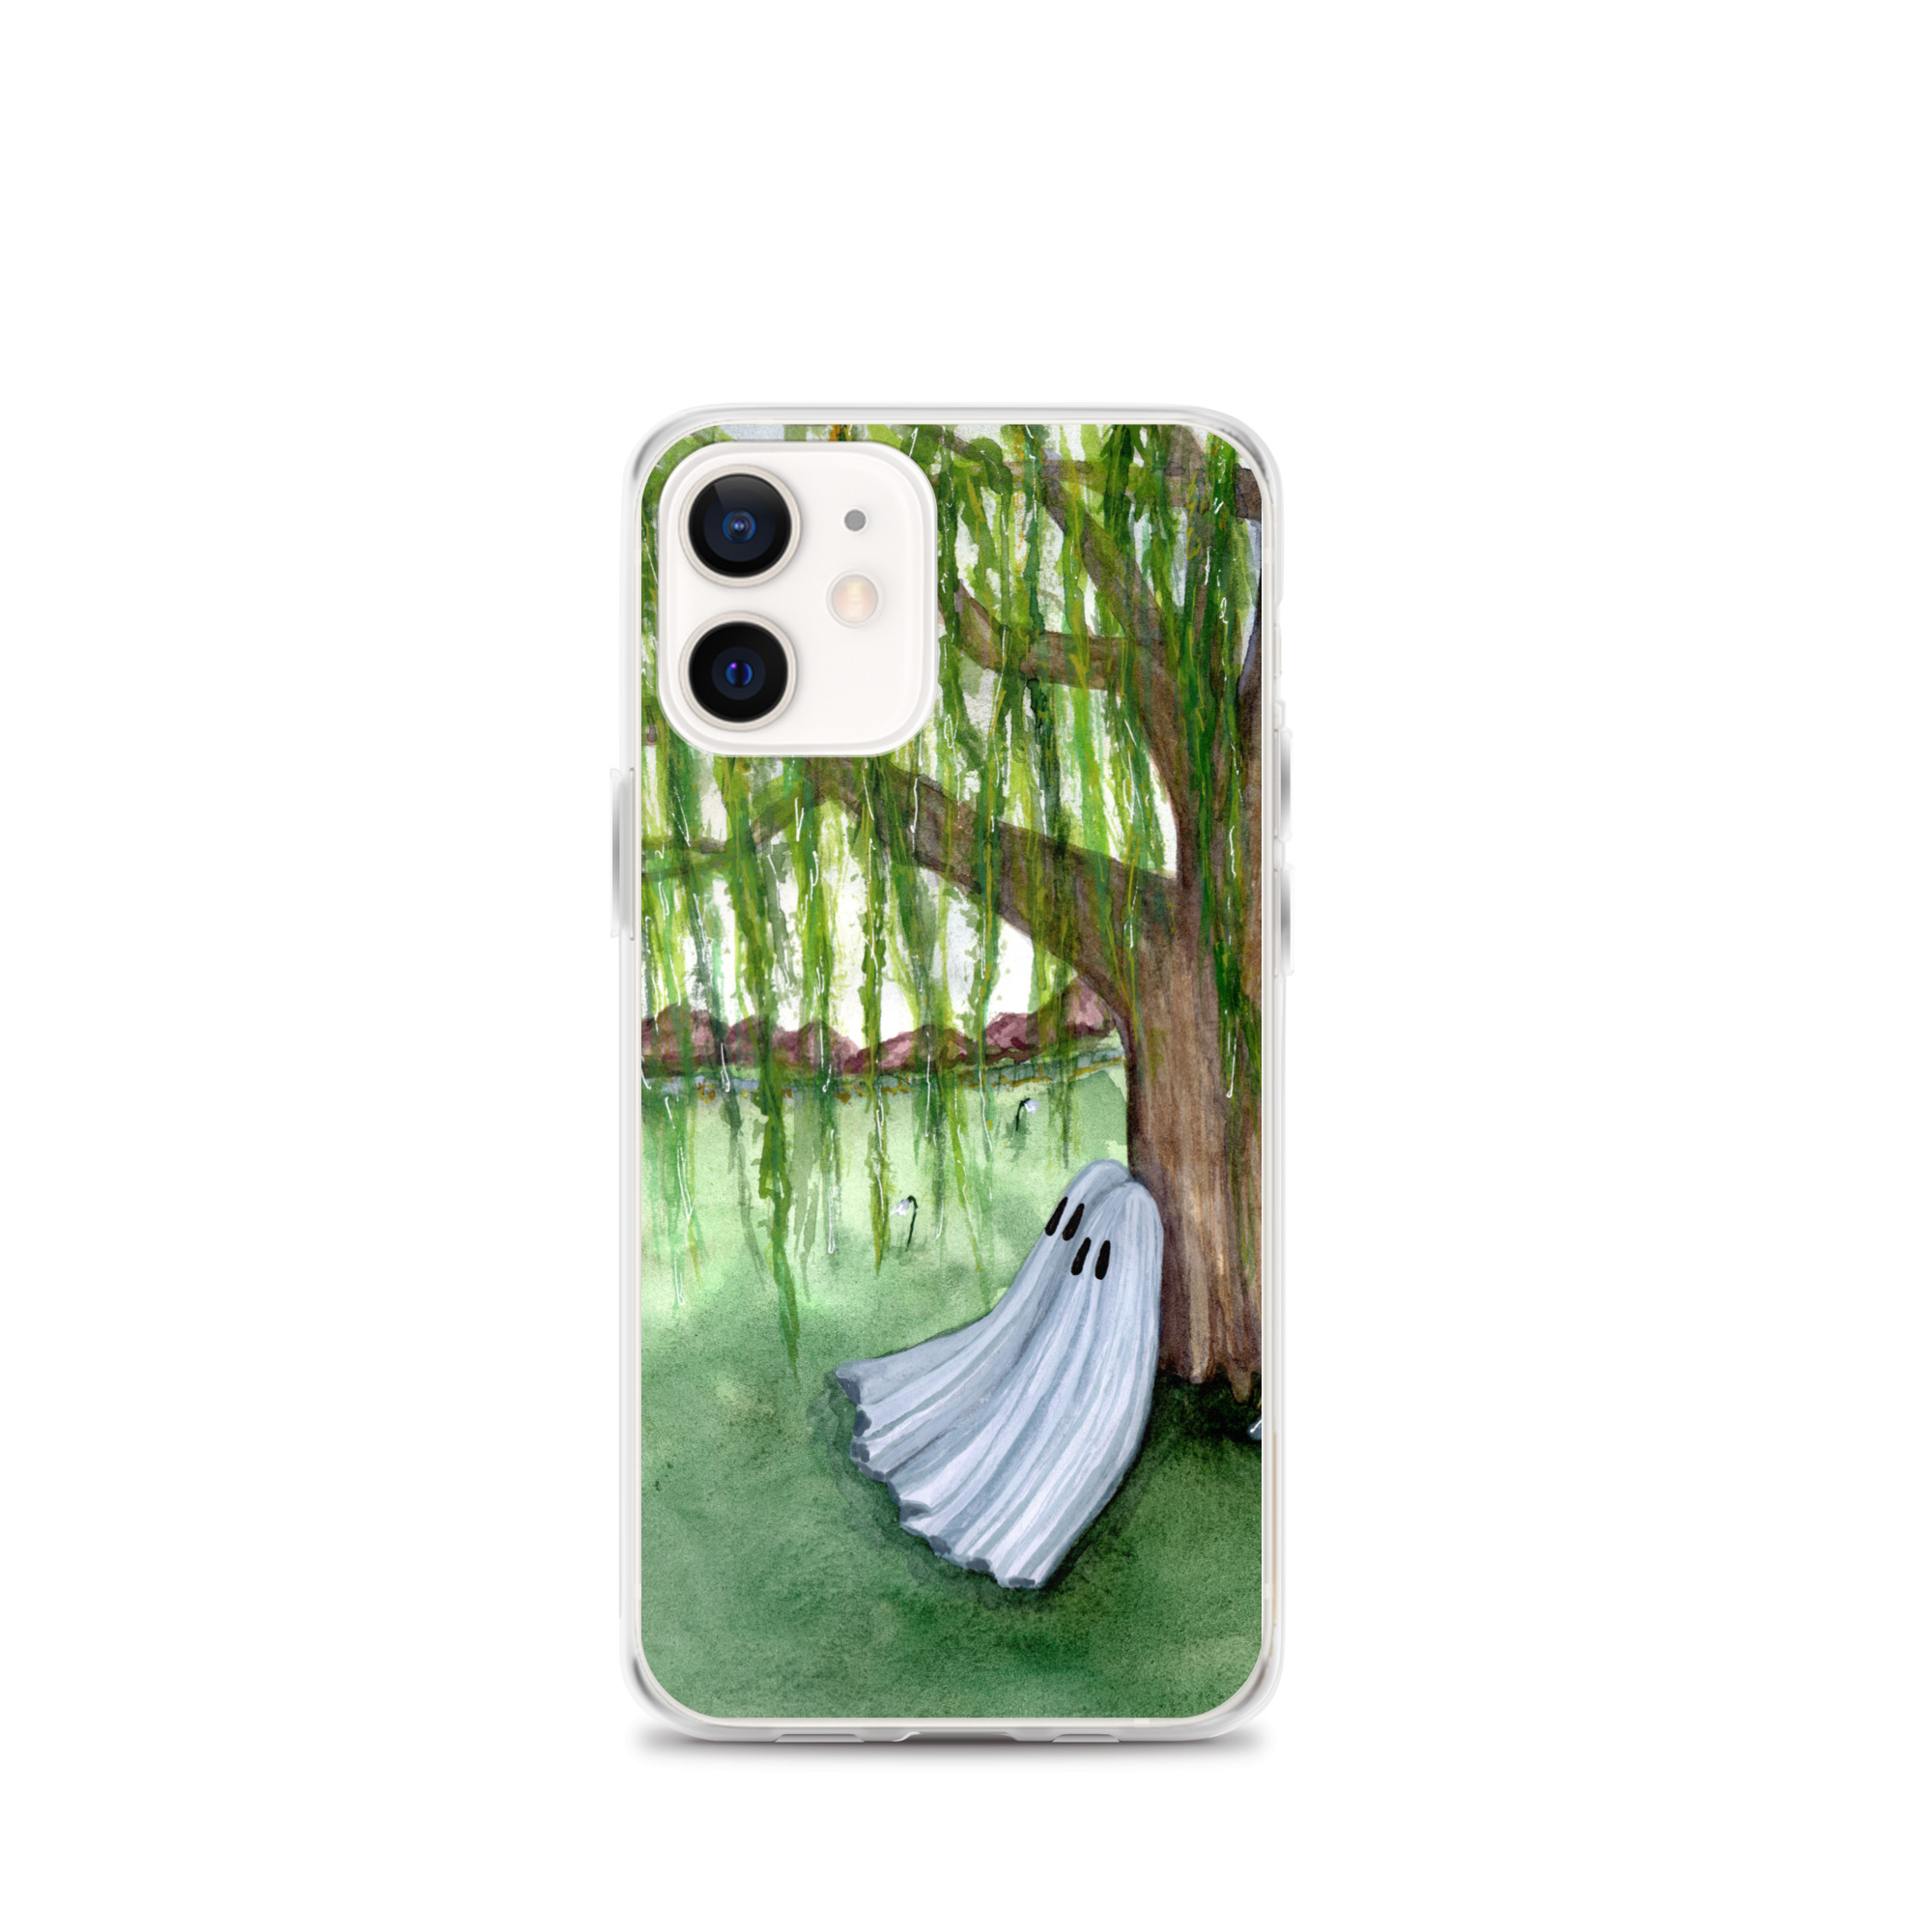 clear-case-for-iphone-iphone-12-mini-case-on-phone-642b421819bf6.jpg